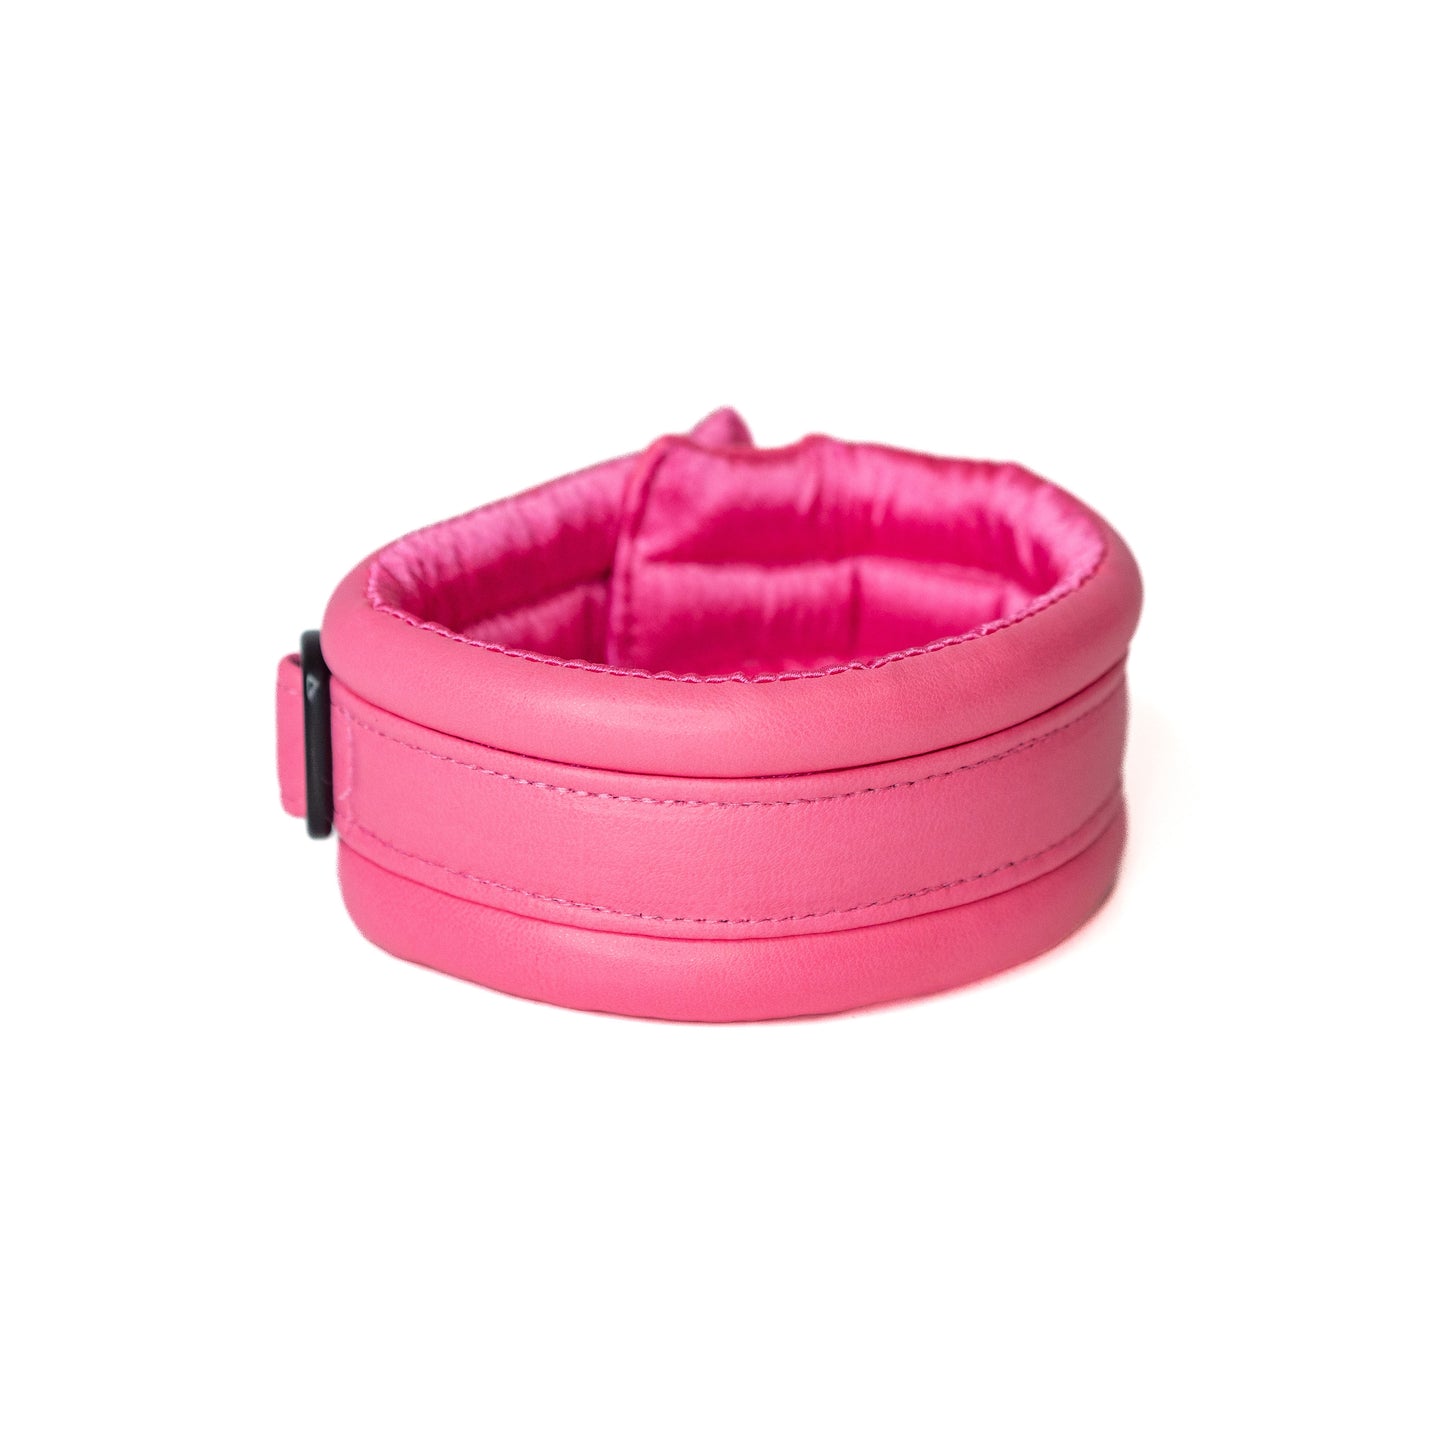 Toy / Miniature / Medium Compact Magnetic Collar Stacie